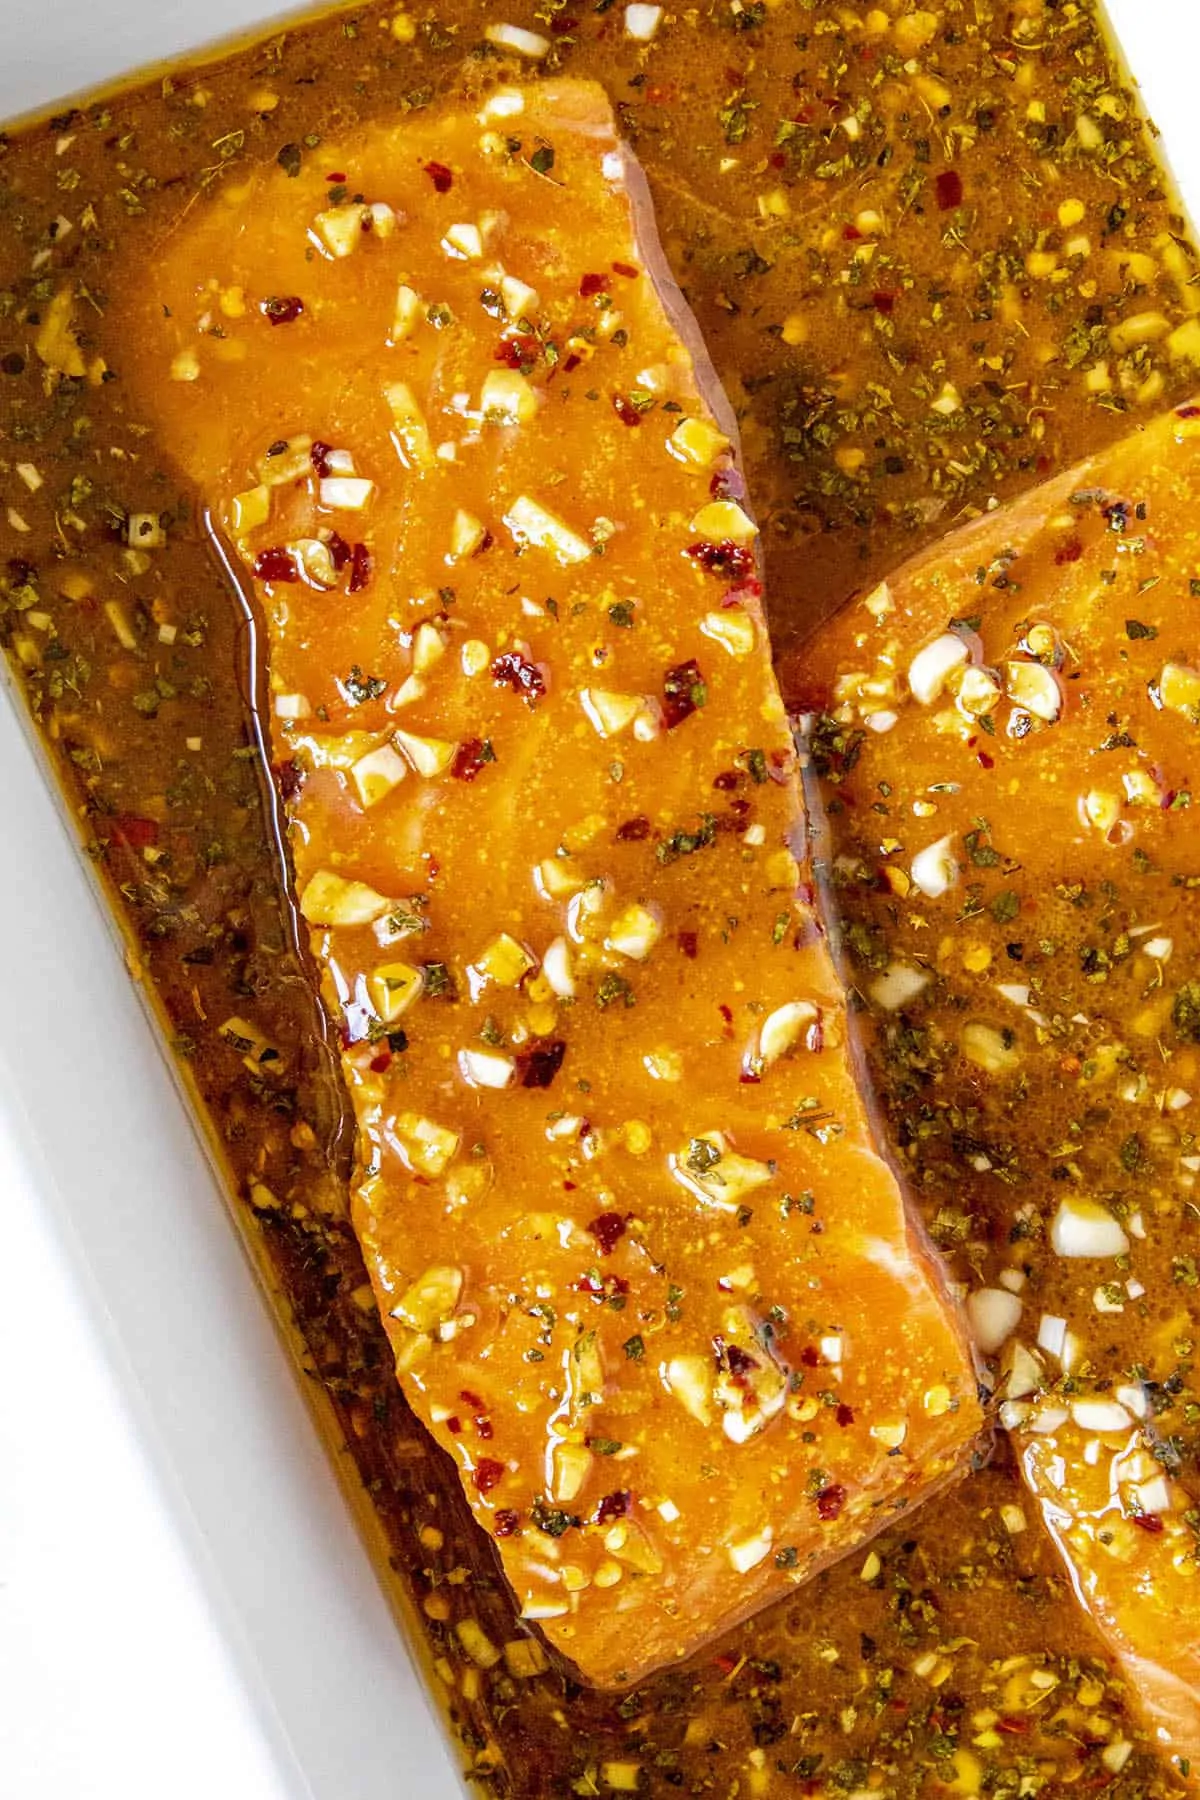 Salmon marinating in a spicy salmon marinade